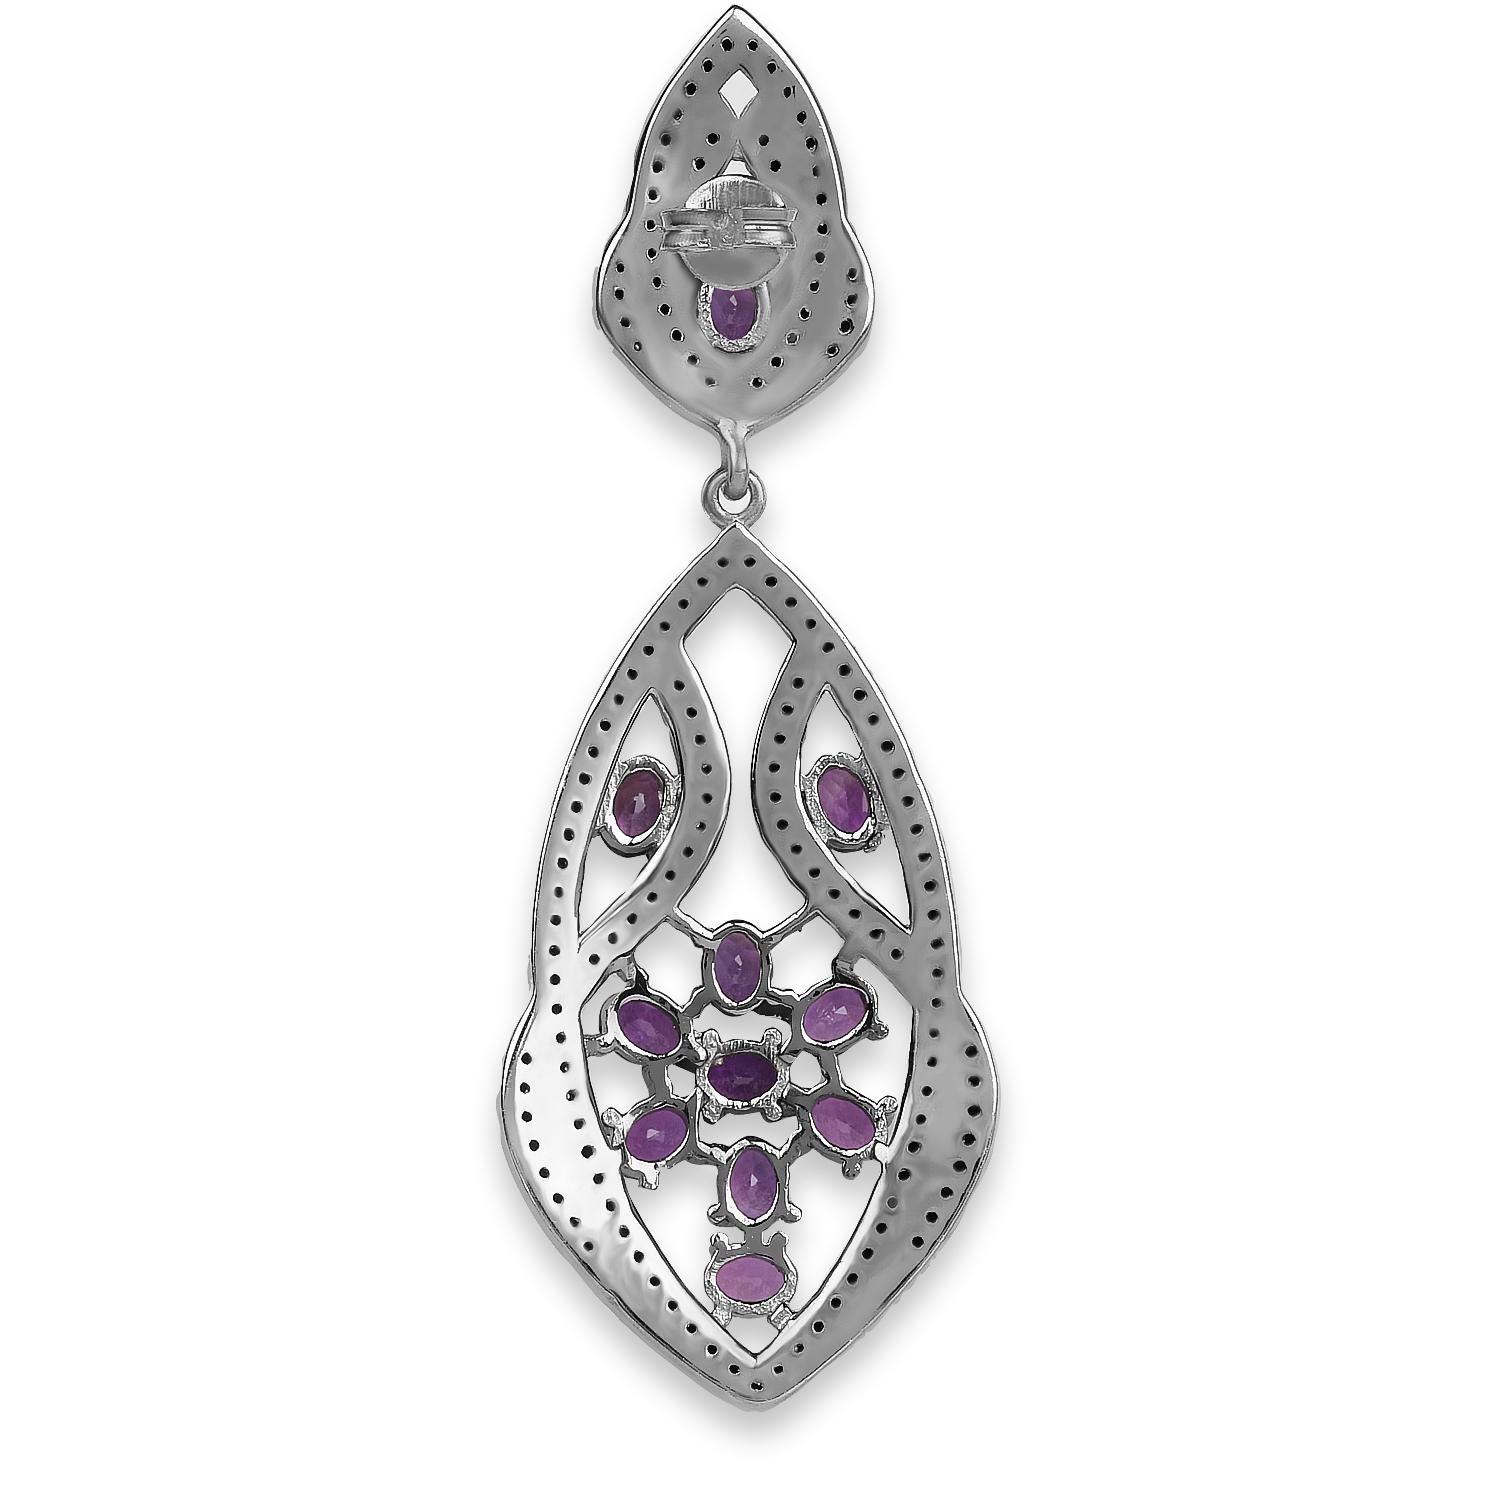 Amethyst Earrings With Black Spinels 5.74 Carats Rhodium Plated Sterling Silver In Excellent Condition For Sale In Laguna Niguel, CA